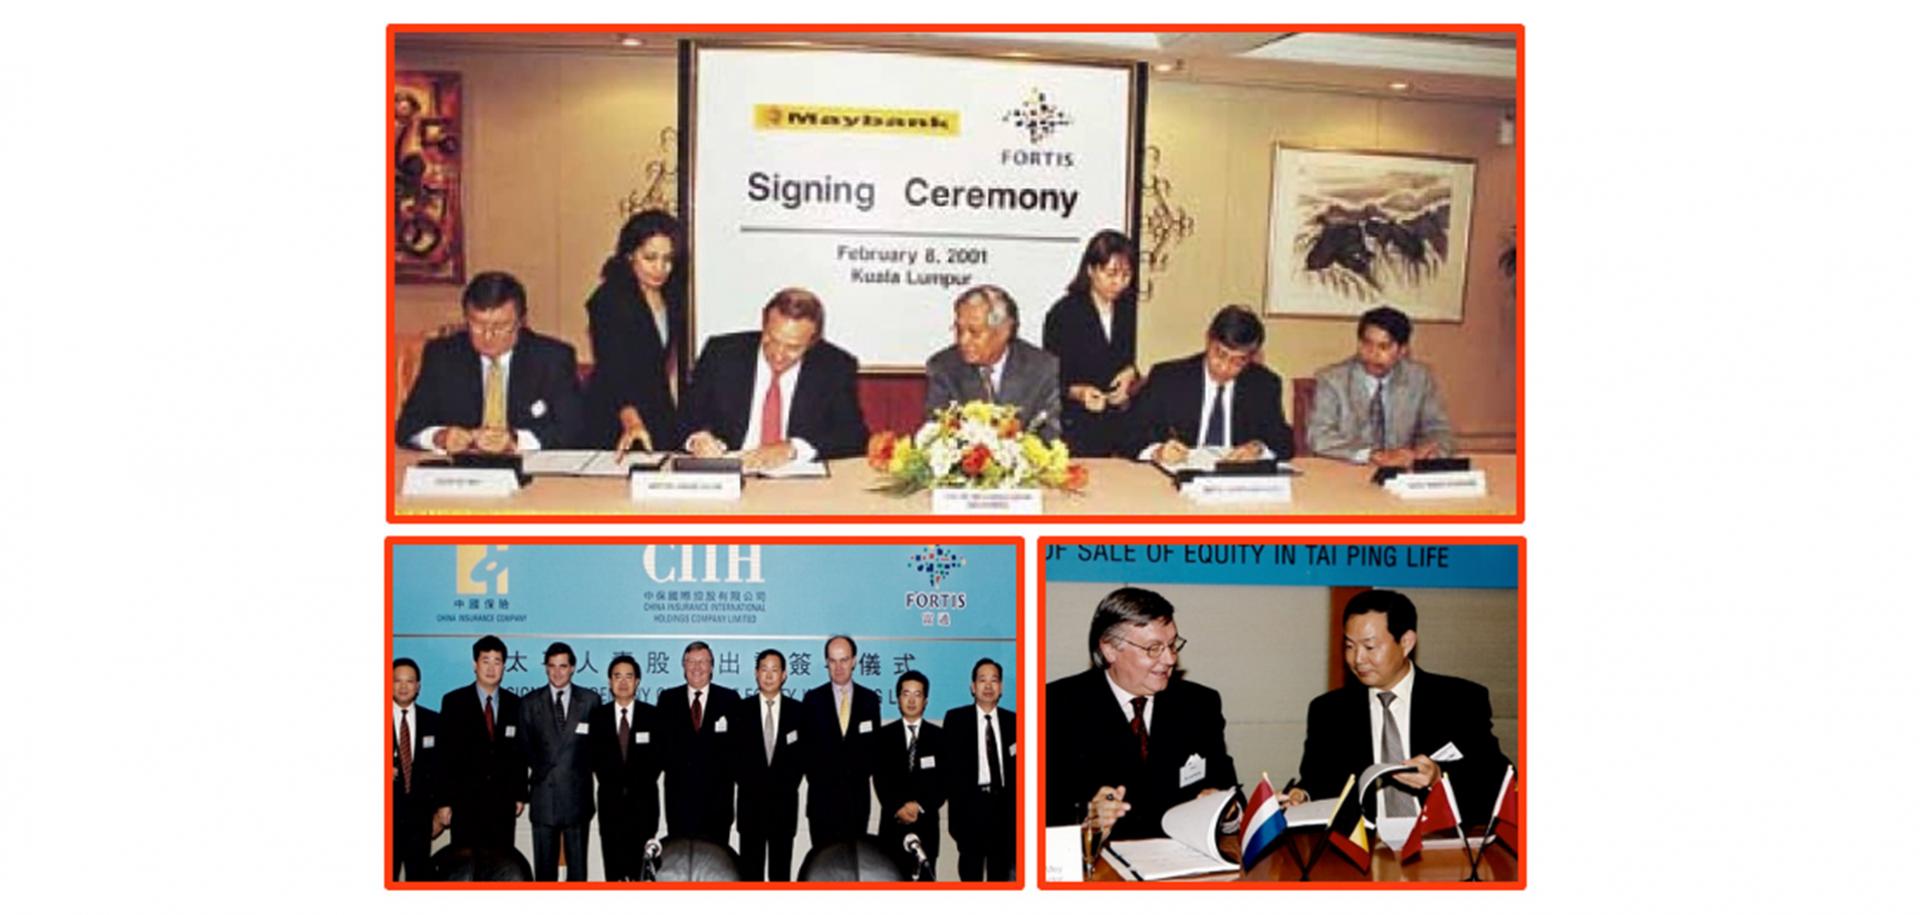 Signing ceremony with Taiping Life on 7 December 2001 and Maybank on 8 February 2021